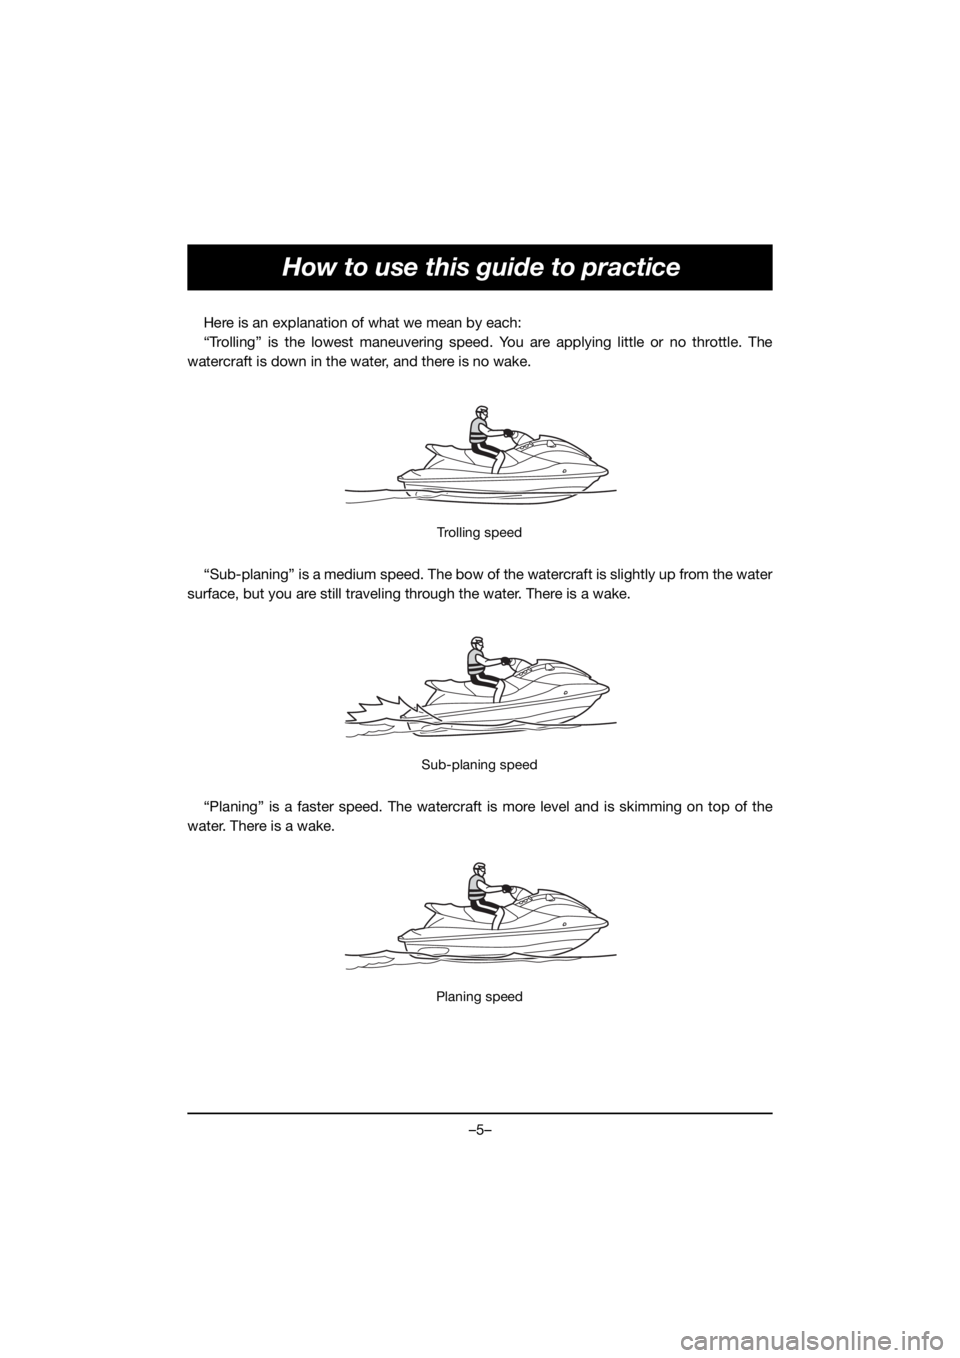 YAMAHA VX LIMITED HO 2021  Owners Manual –5–
How to use this guide to practice
Here is an explanation of what we mean by each:
“Trolling” is the lowest maneuvering speed. You are applying little or no throttle. The
watercraft is down